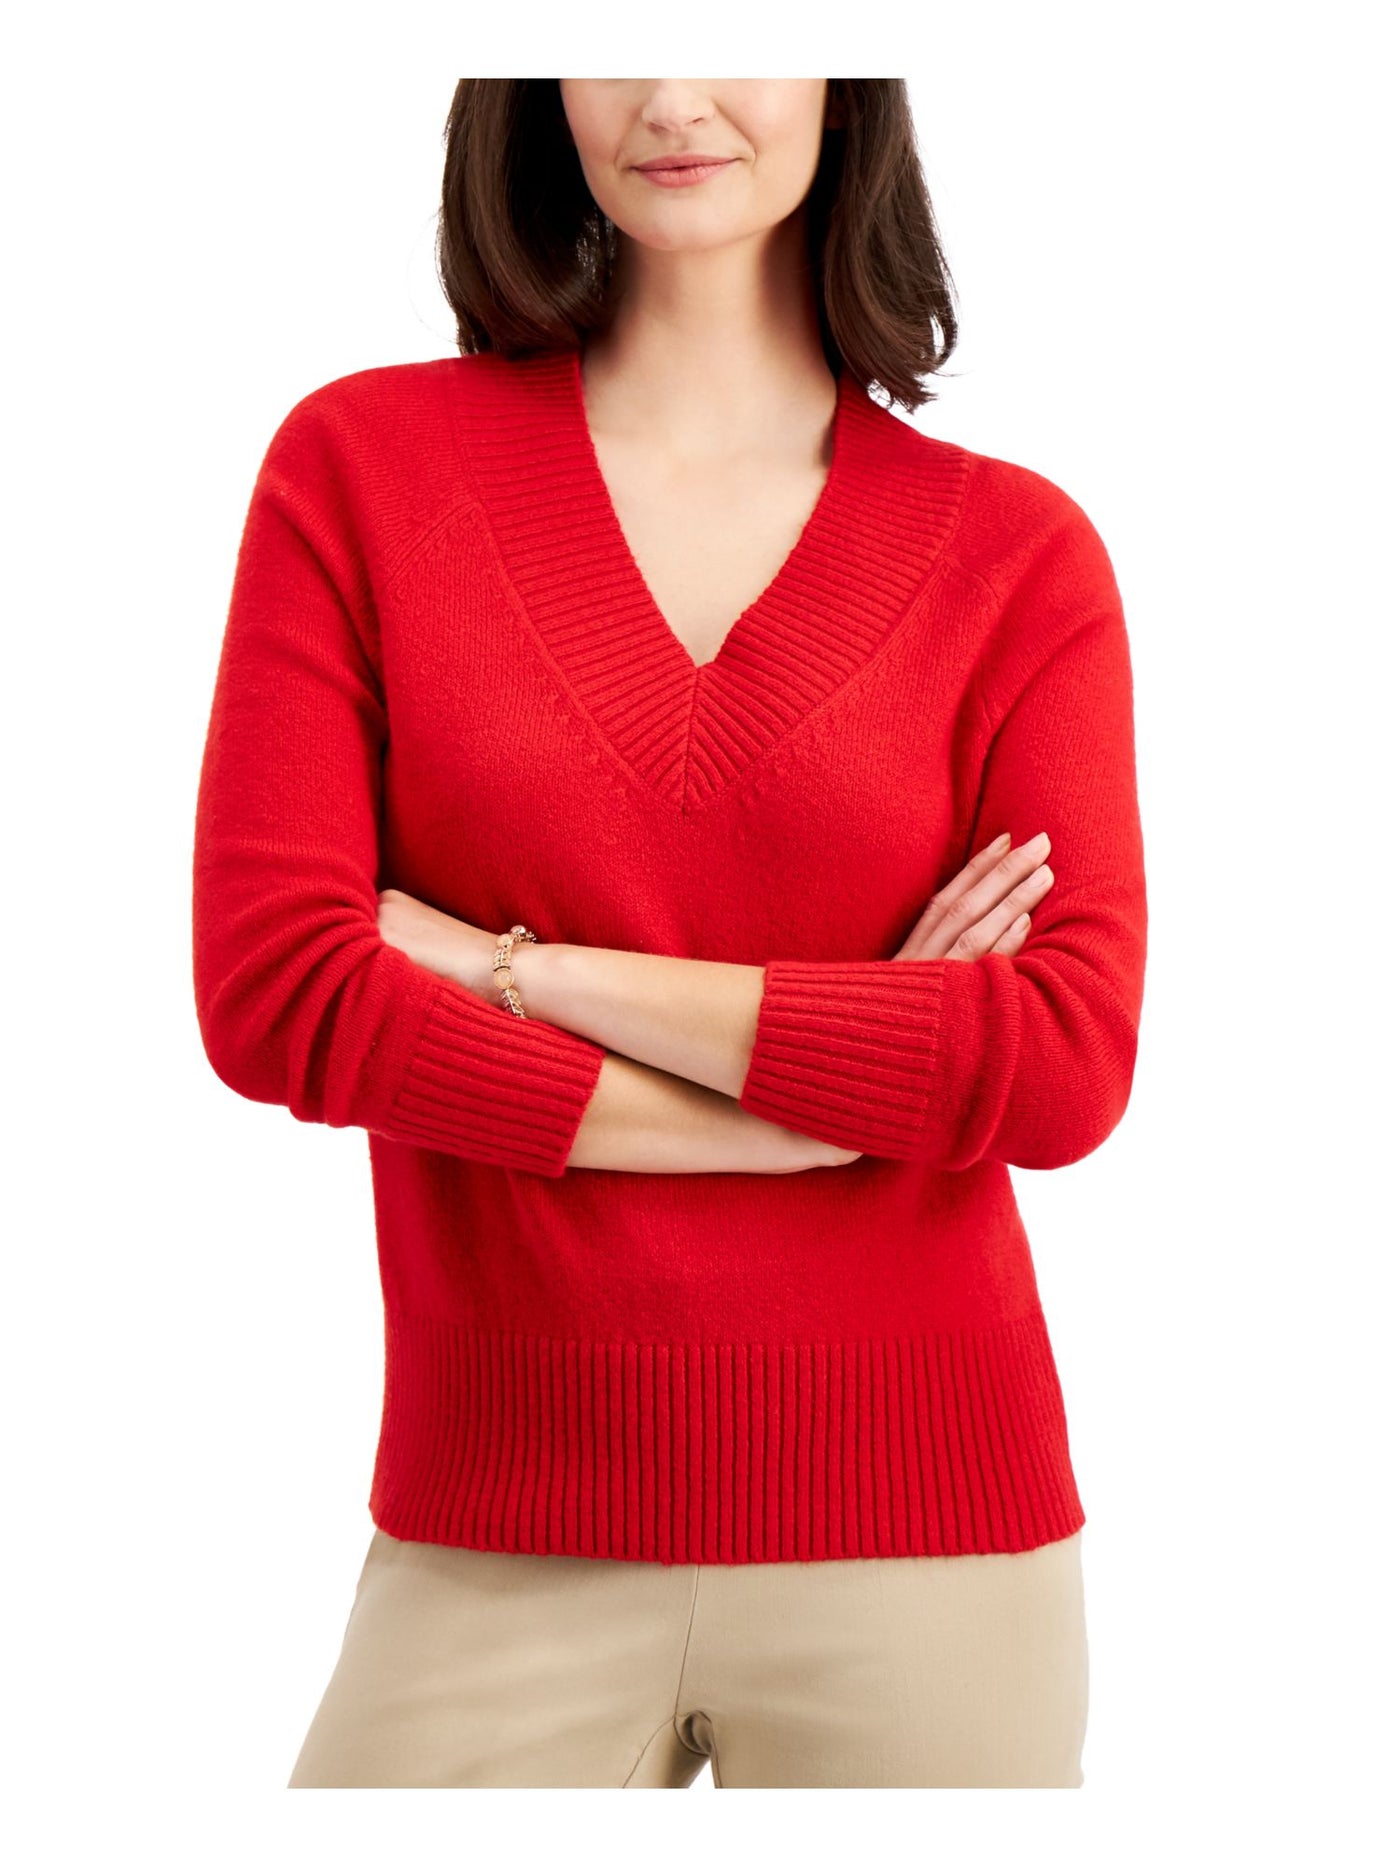 CHARTER CLUB Womens Red Stretch Long Sleeve V Neck Wear To Work Sweater M